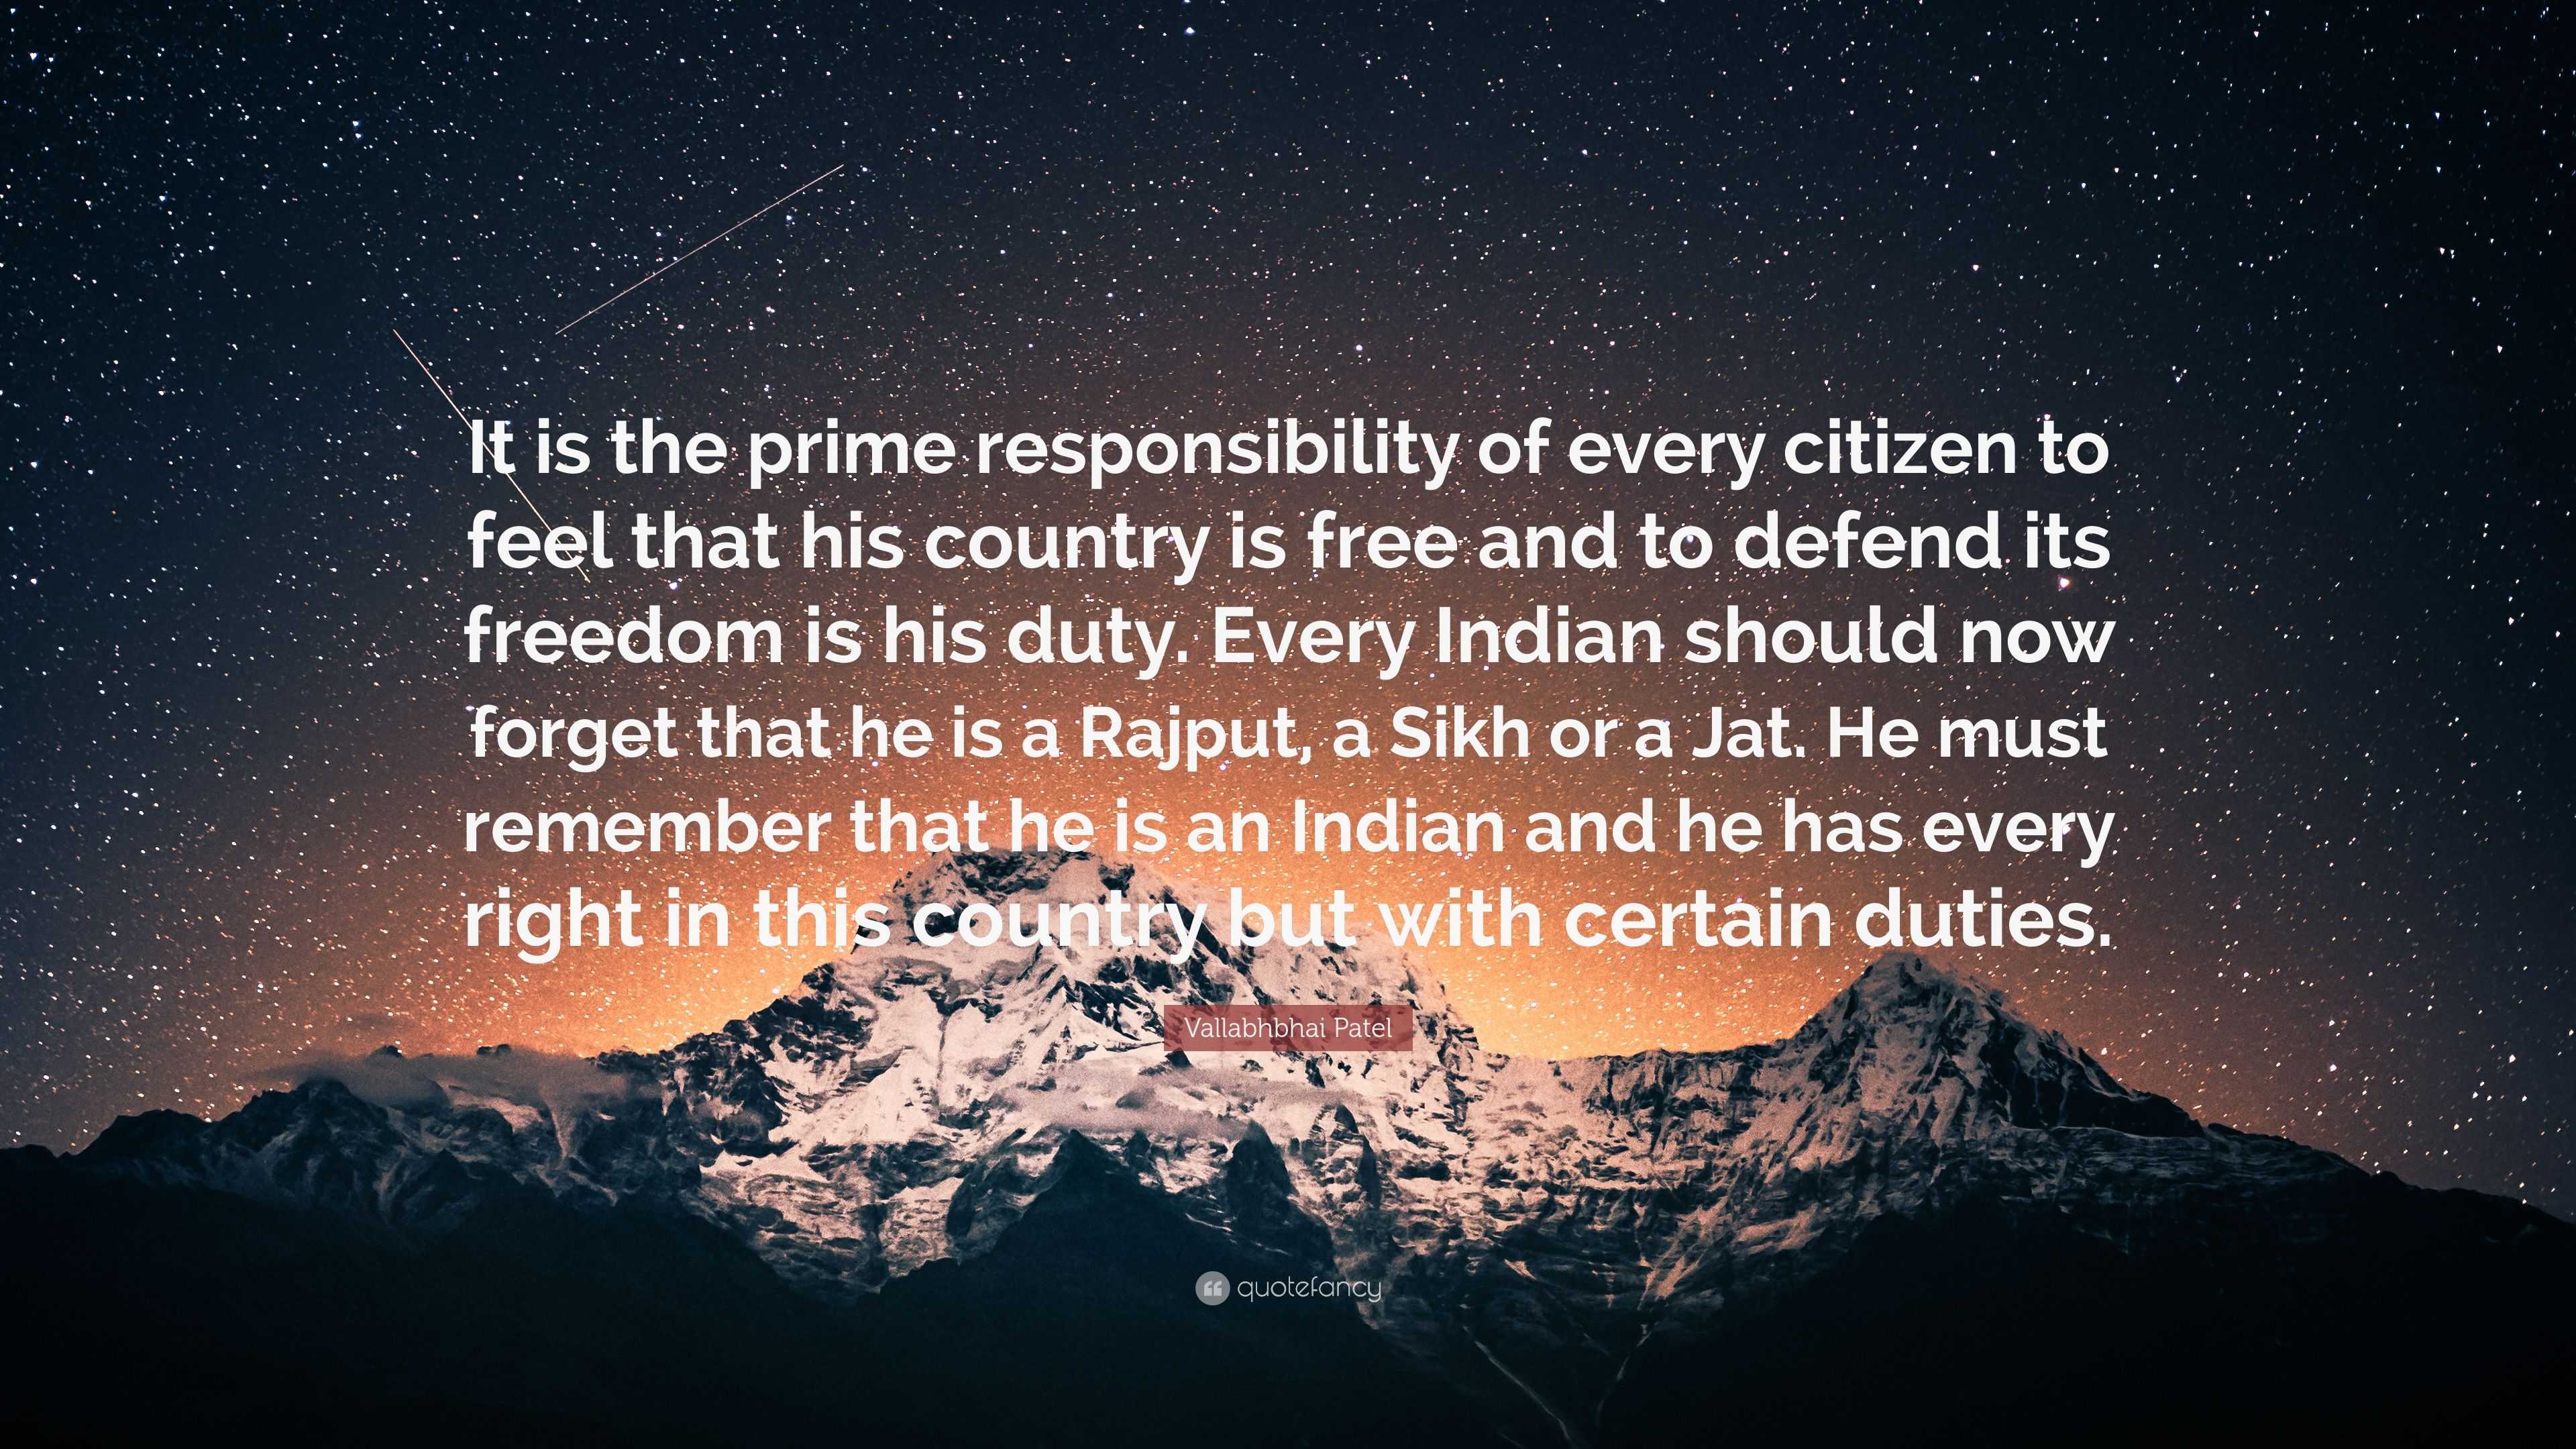 Vallabhbhai Patel Quote: “It is the prime responsibility of every citizen  to feel that his country is free and to defend its freedom is his duty. ...”